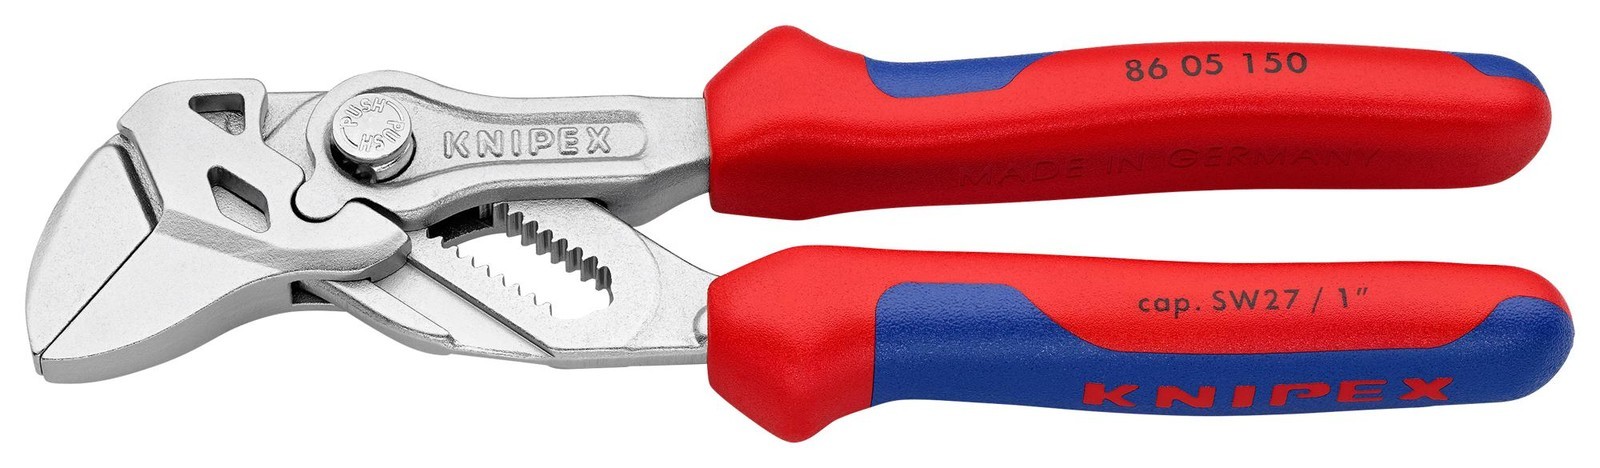 Knipex 86 05 150 Mini Plier Wrench, 150mm